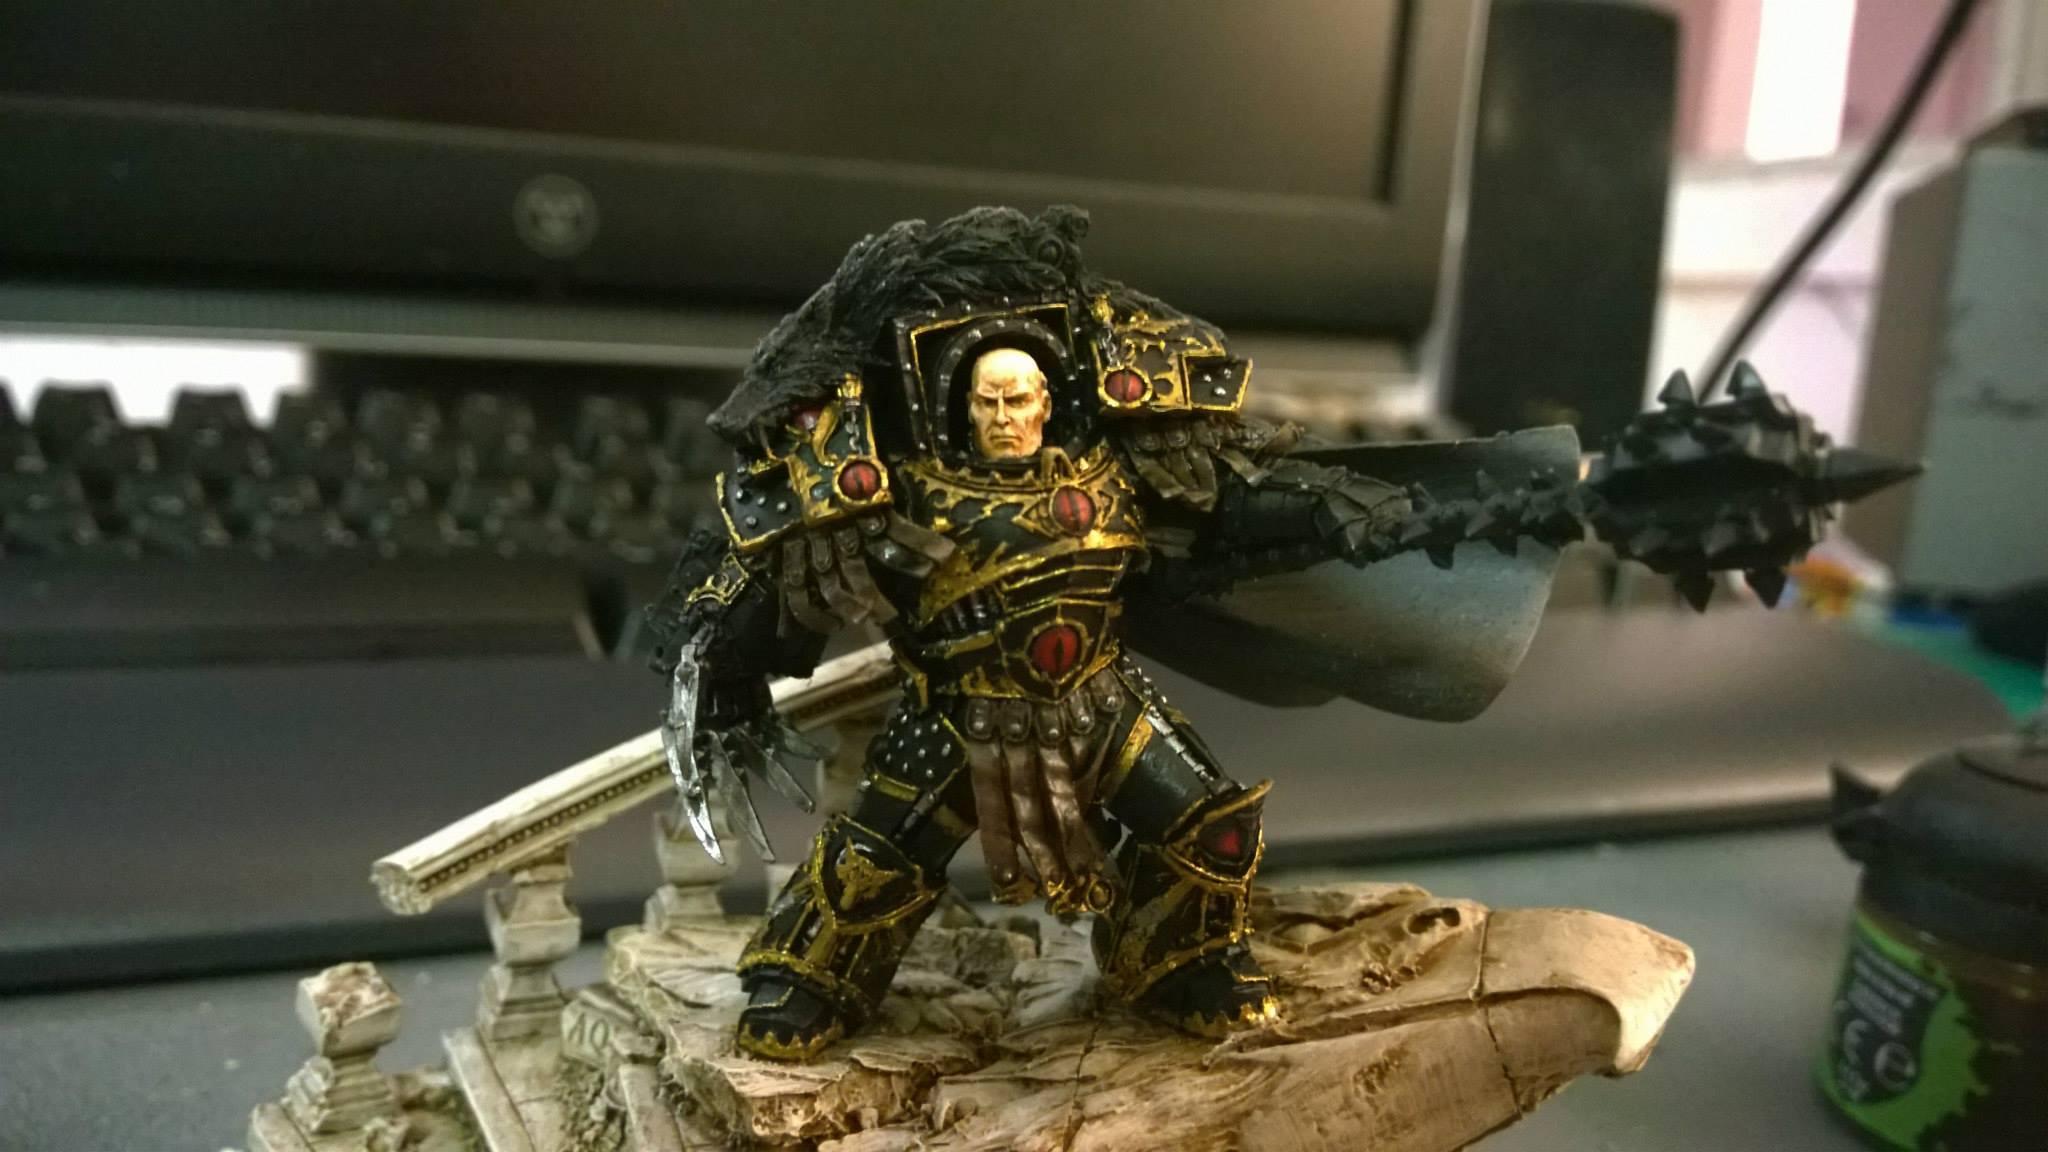 30k, Age Of Darkness, Character, Display, Forge World, Horus, Horus Heresy, Horus The Warmaster, Legion, Luna Wolves, Primarch, Sons Of Horus, Space Marines